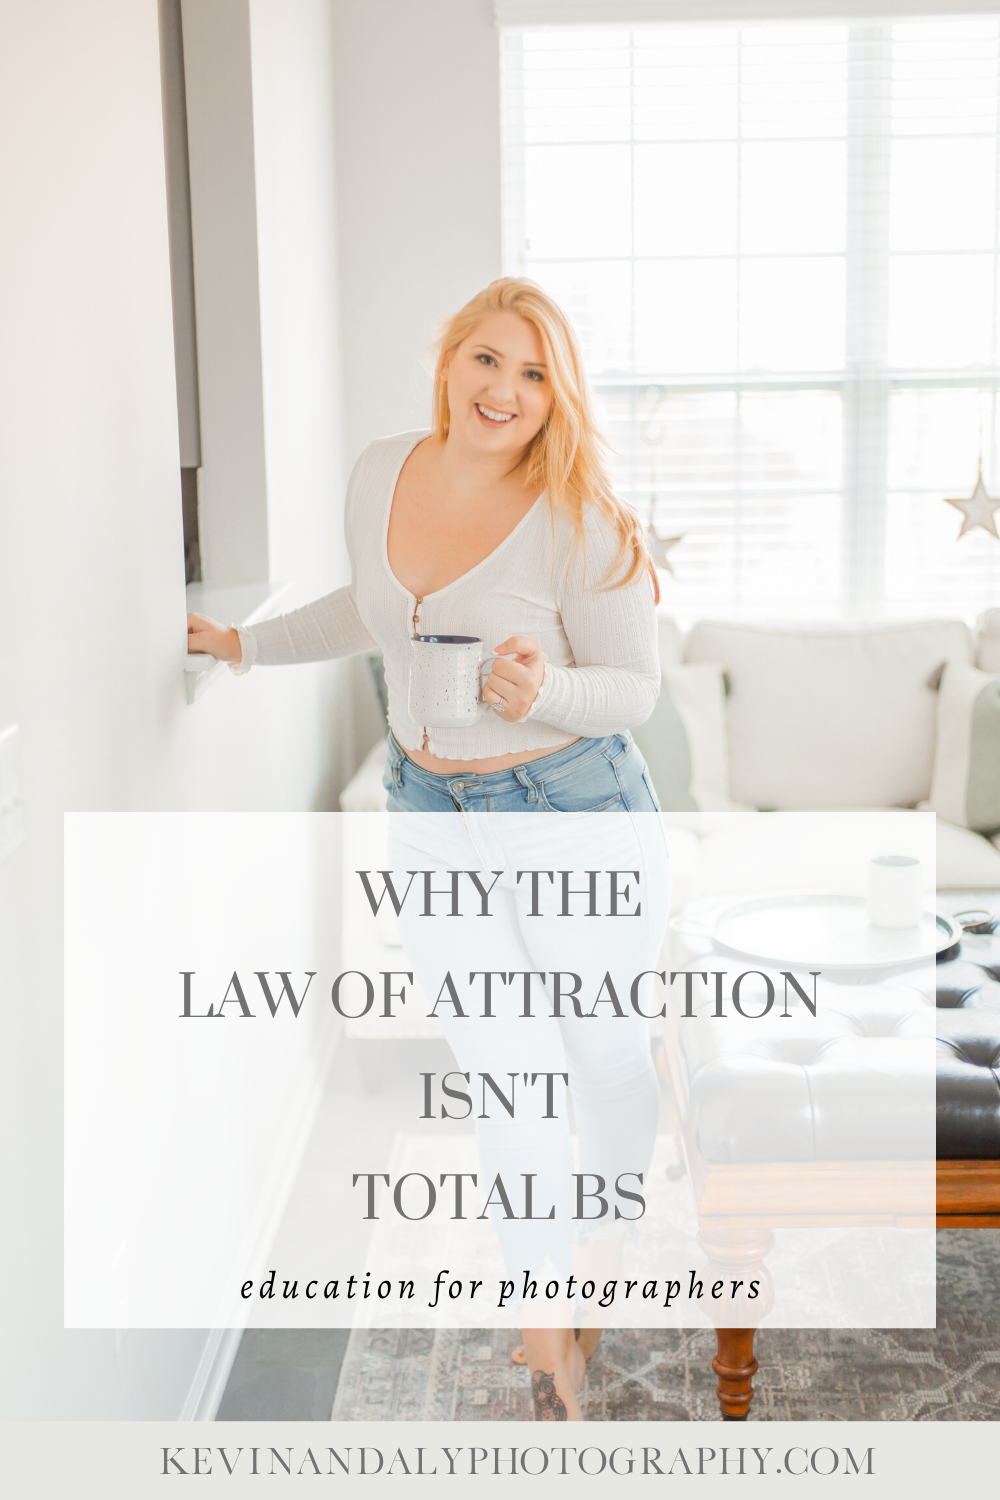 education blog for photographers on the law of attraction